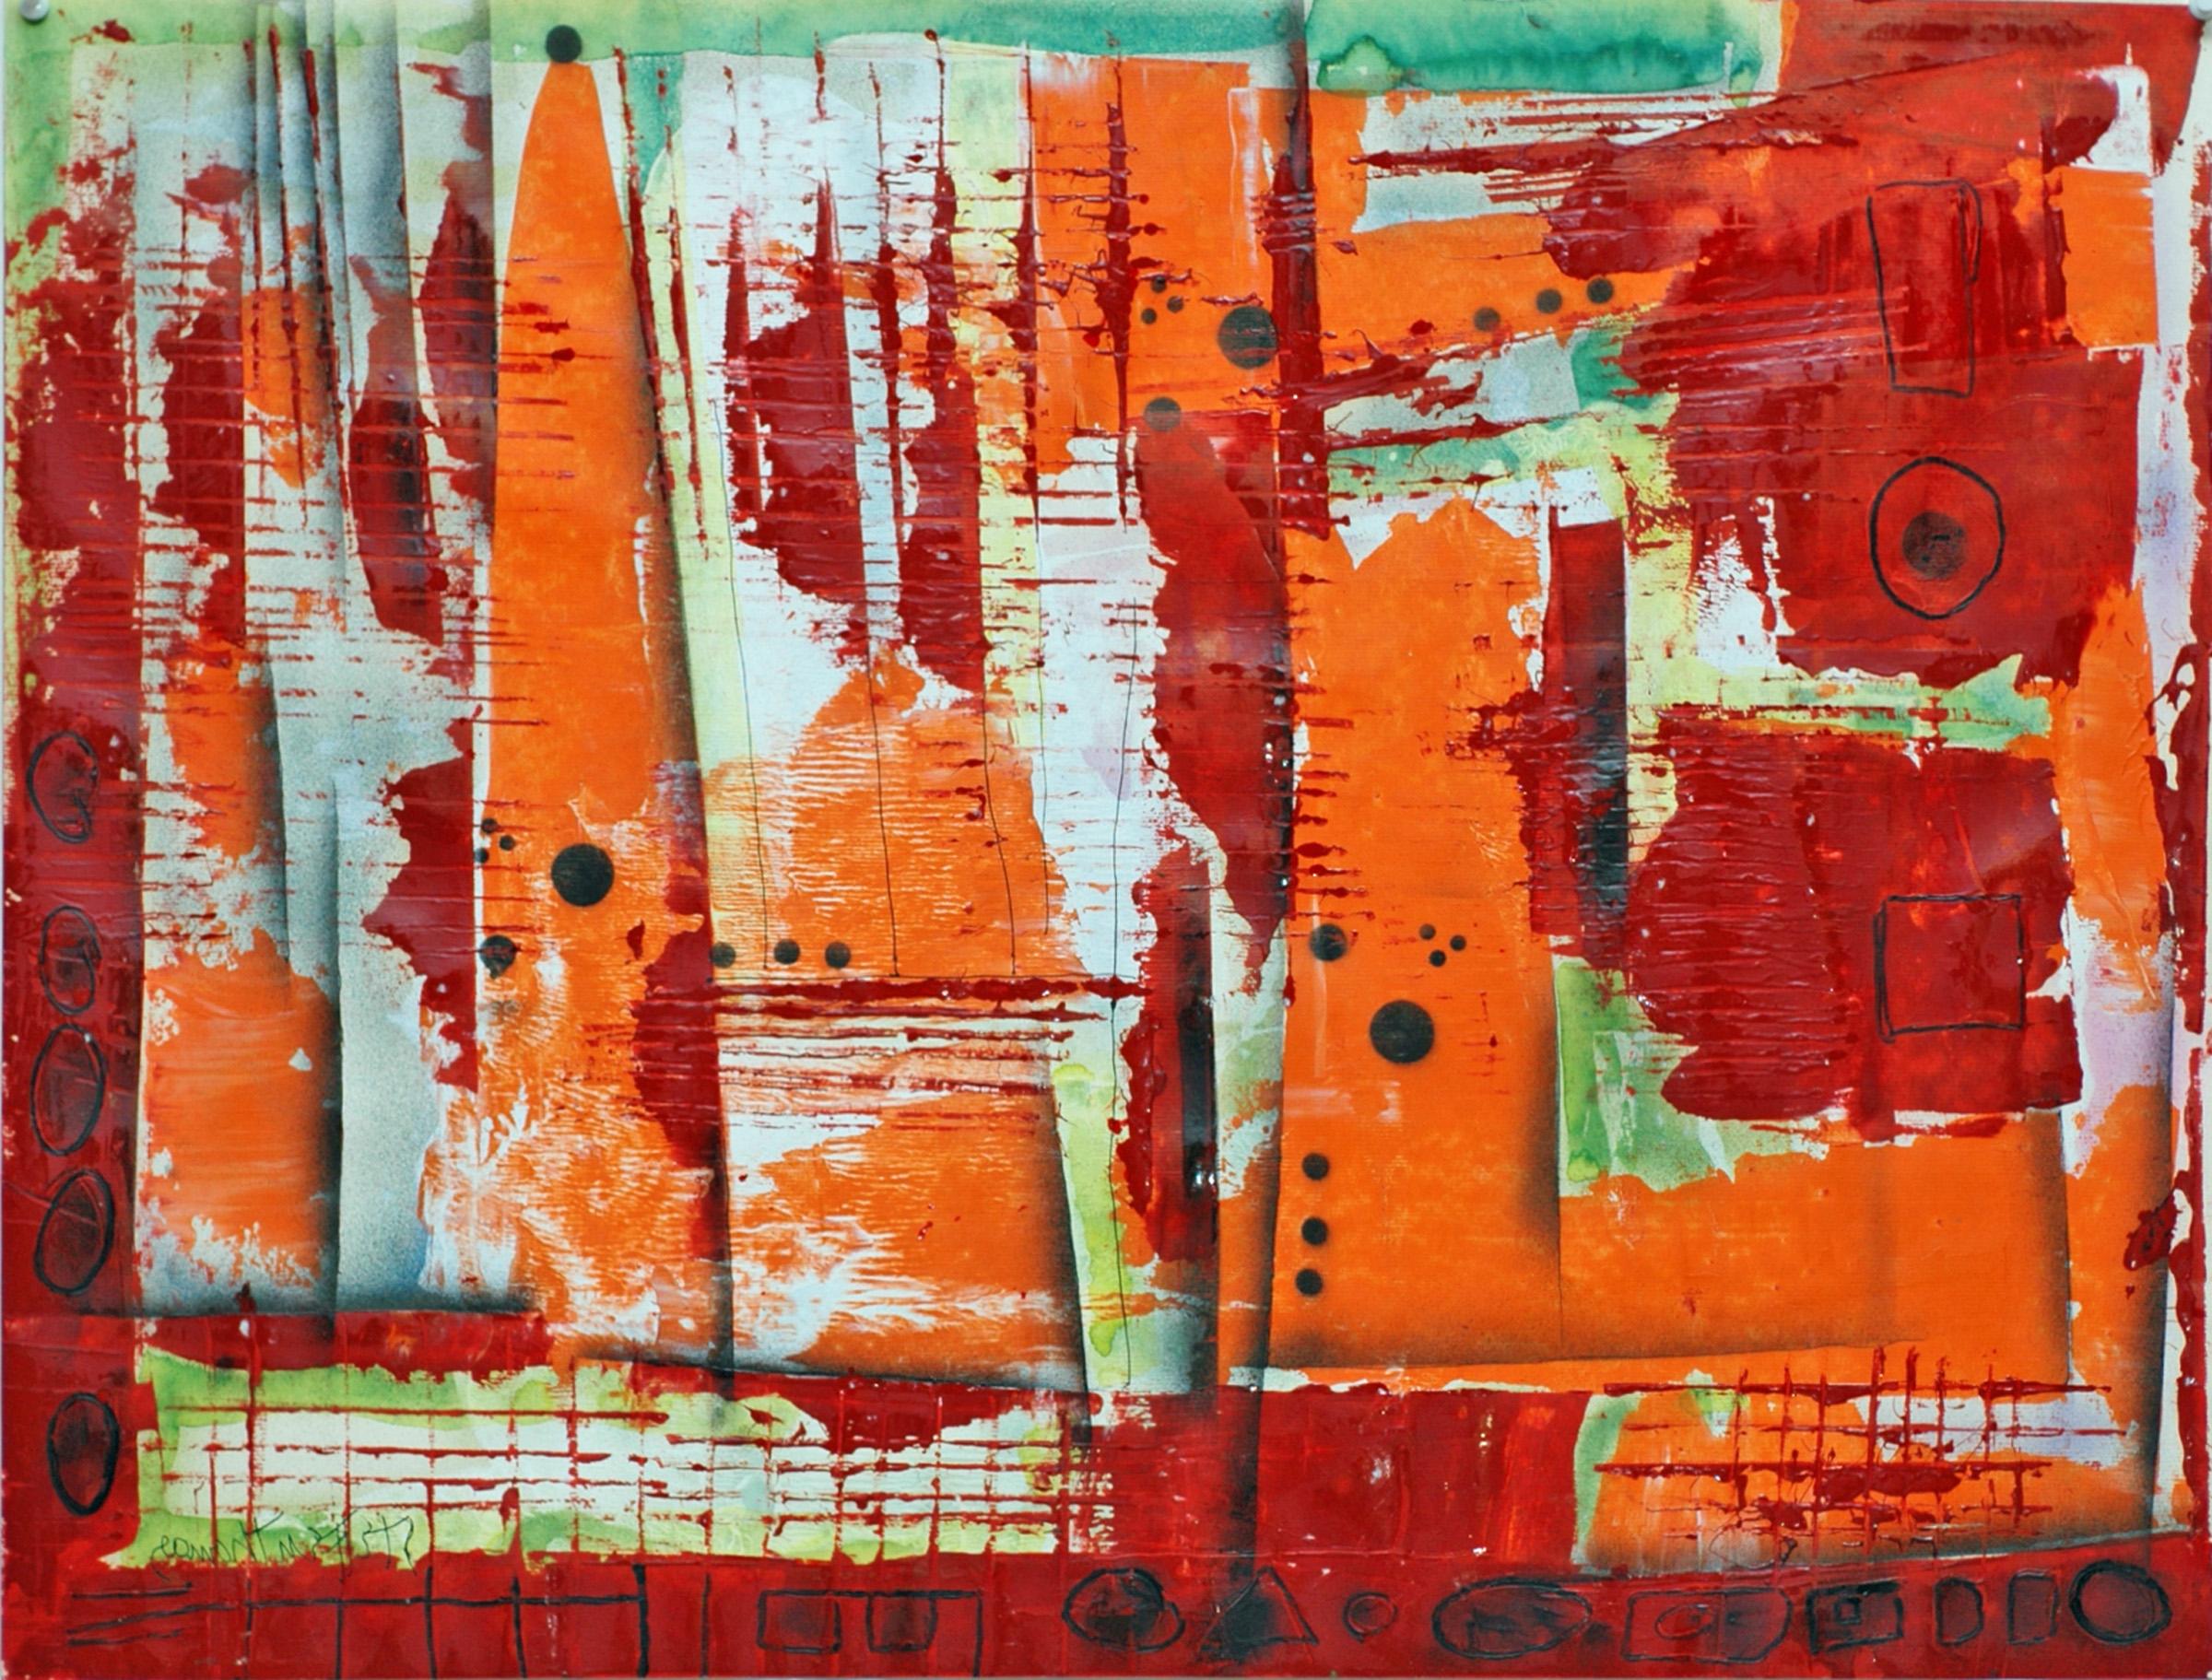 "Land Forms in Orange and Red" painting by Steffen Thomas